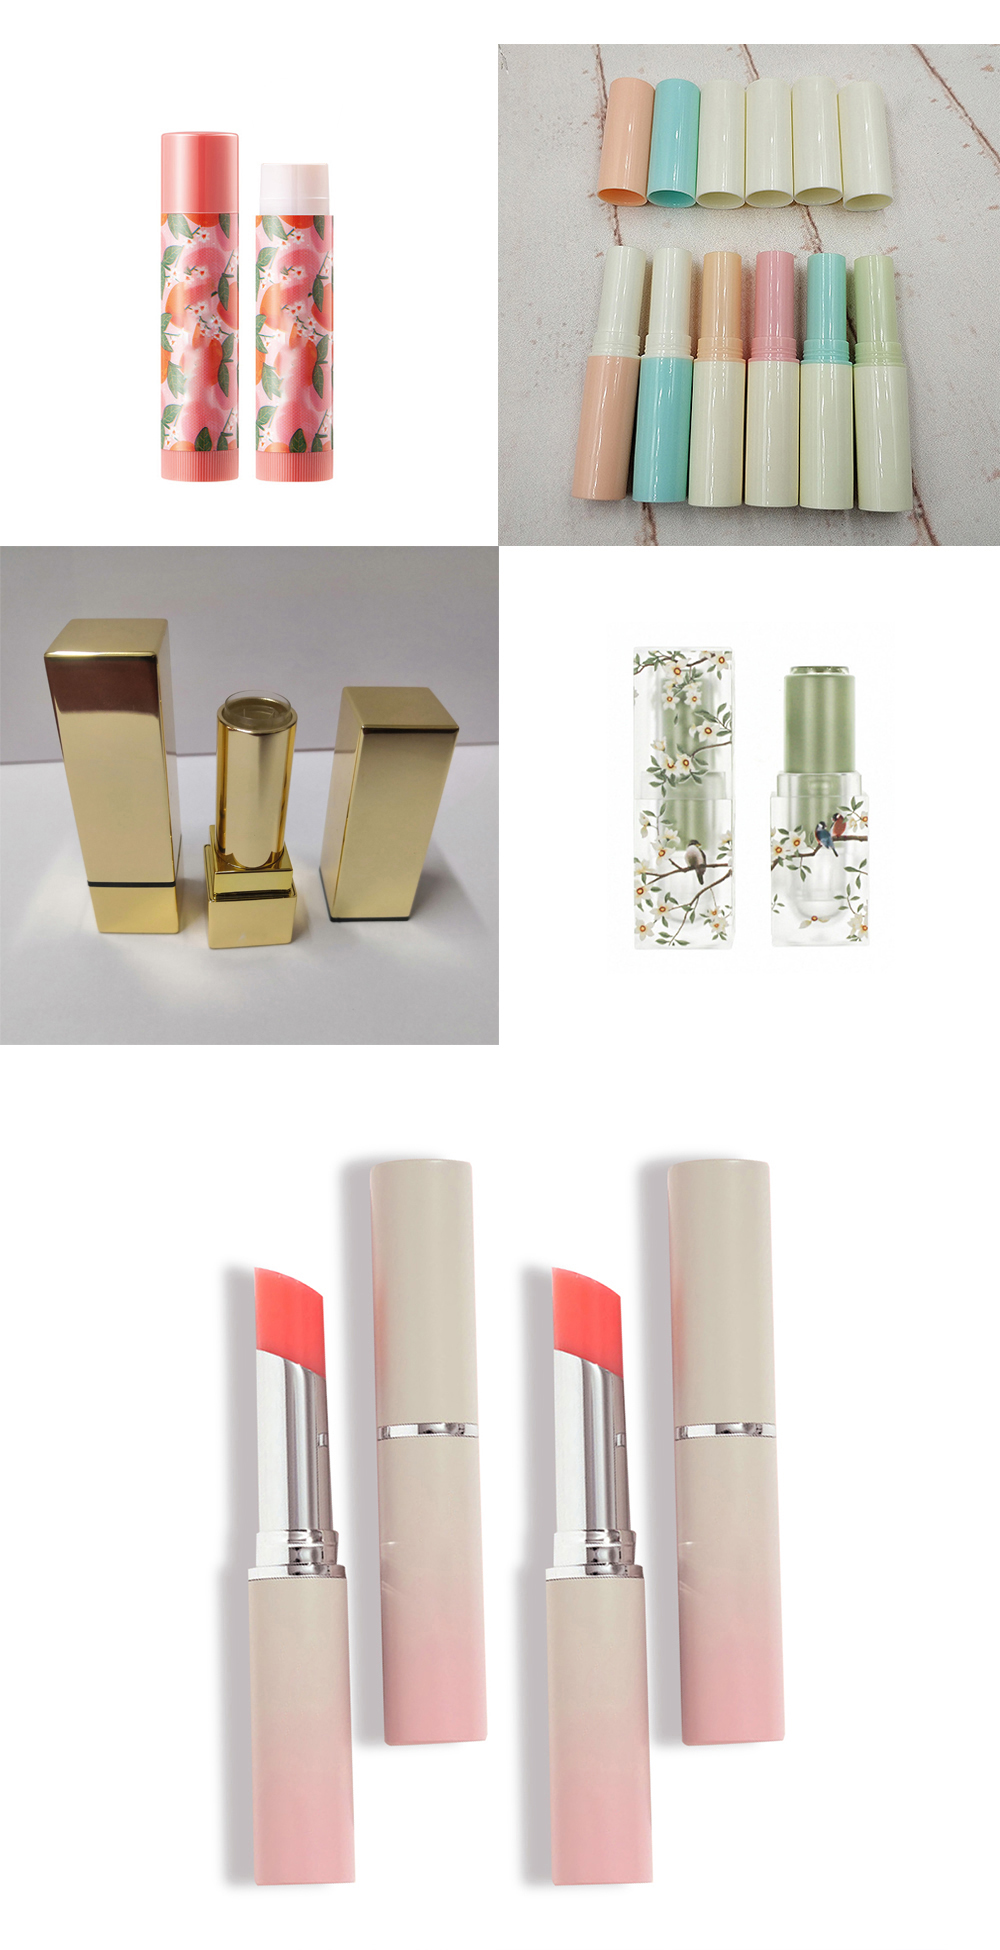 3. Color changing lipstick tube